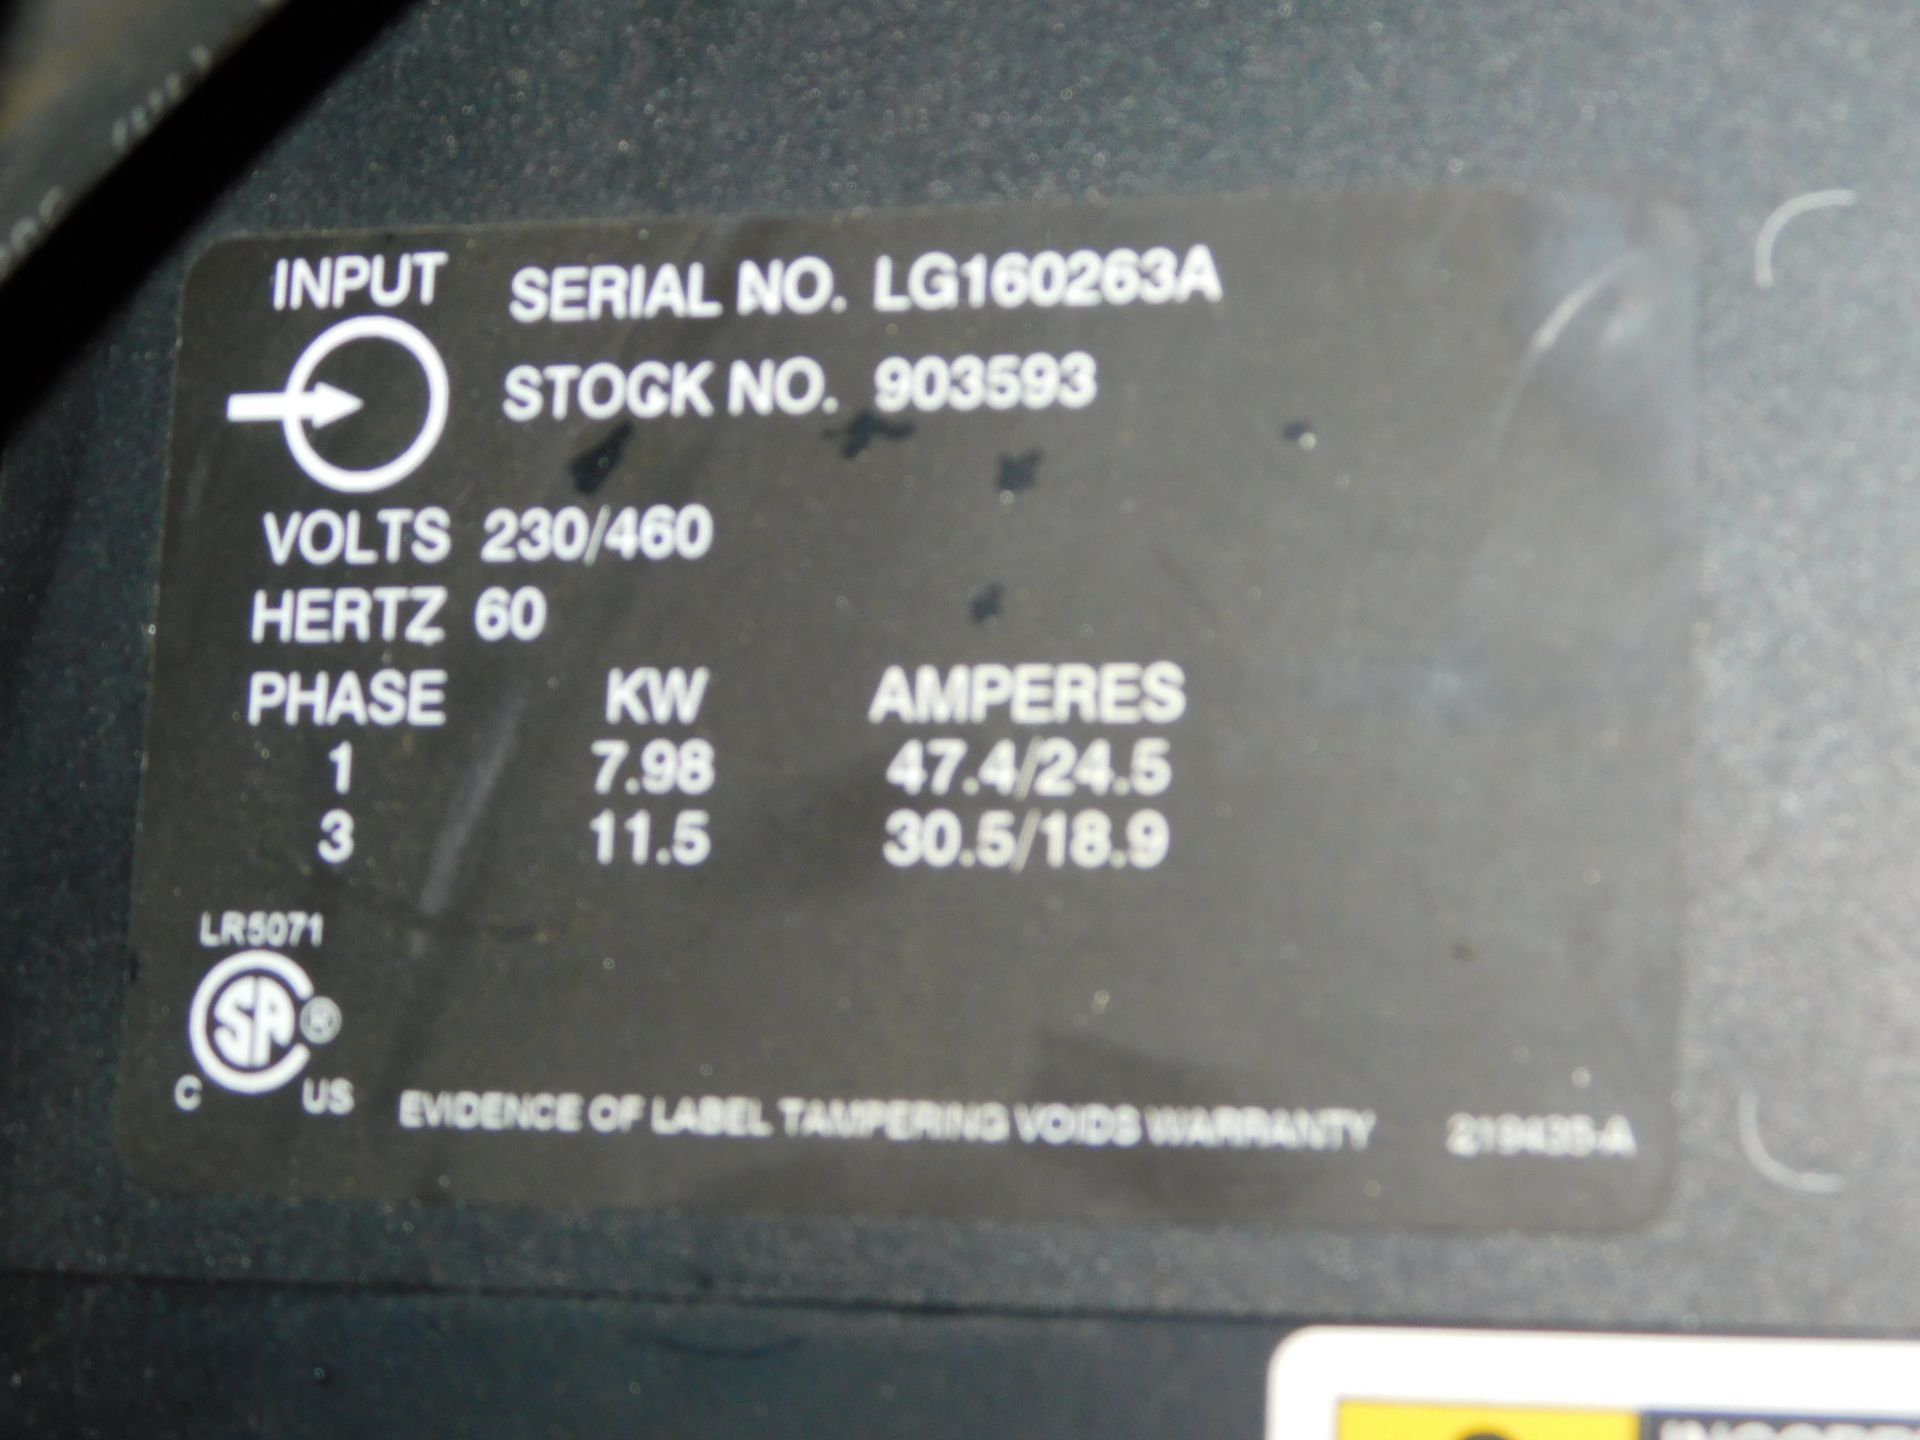 Miller Invision 354MP DC Inverter Arc Welder, s/n LG160263A, 1 or 3 Phase, 230/460 Vo.ts - Image 7 of 7